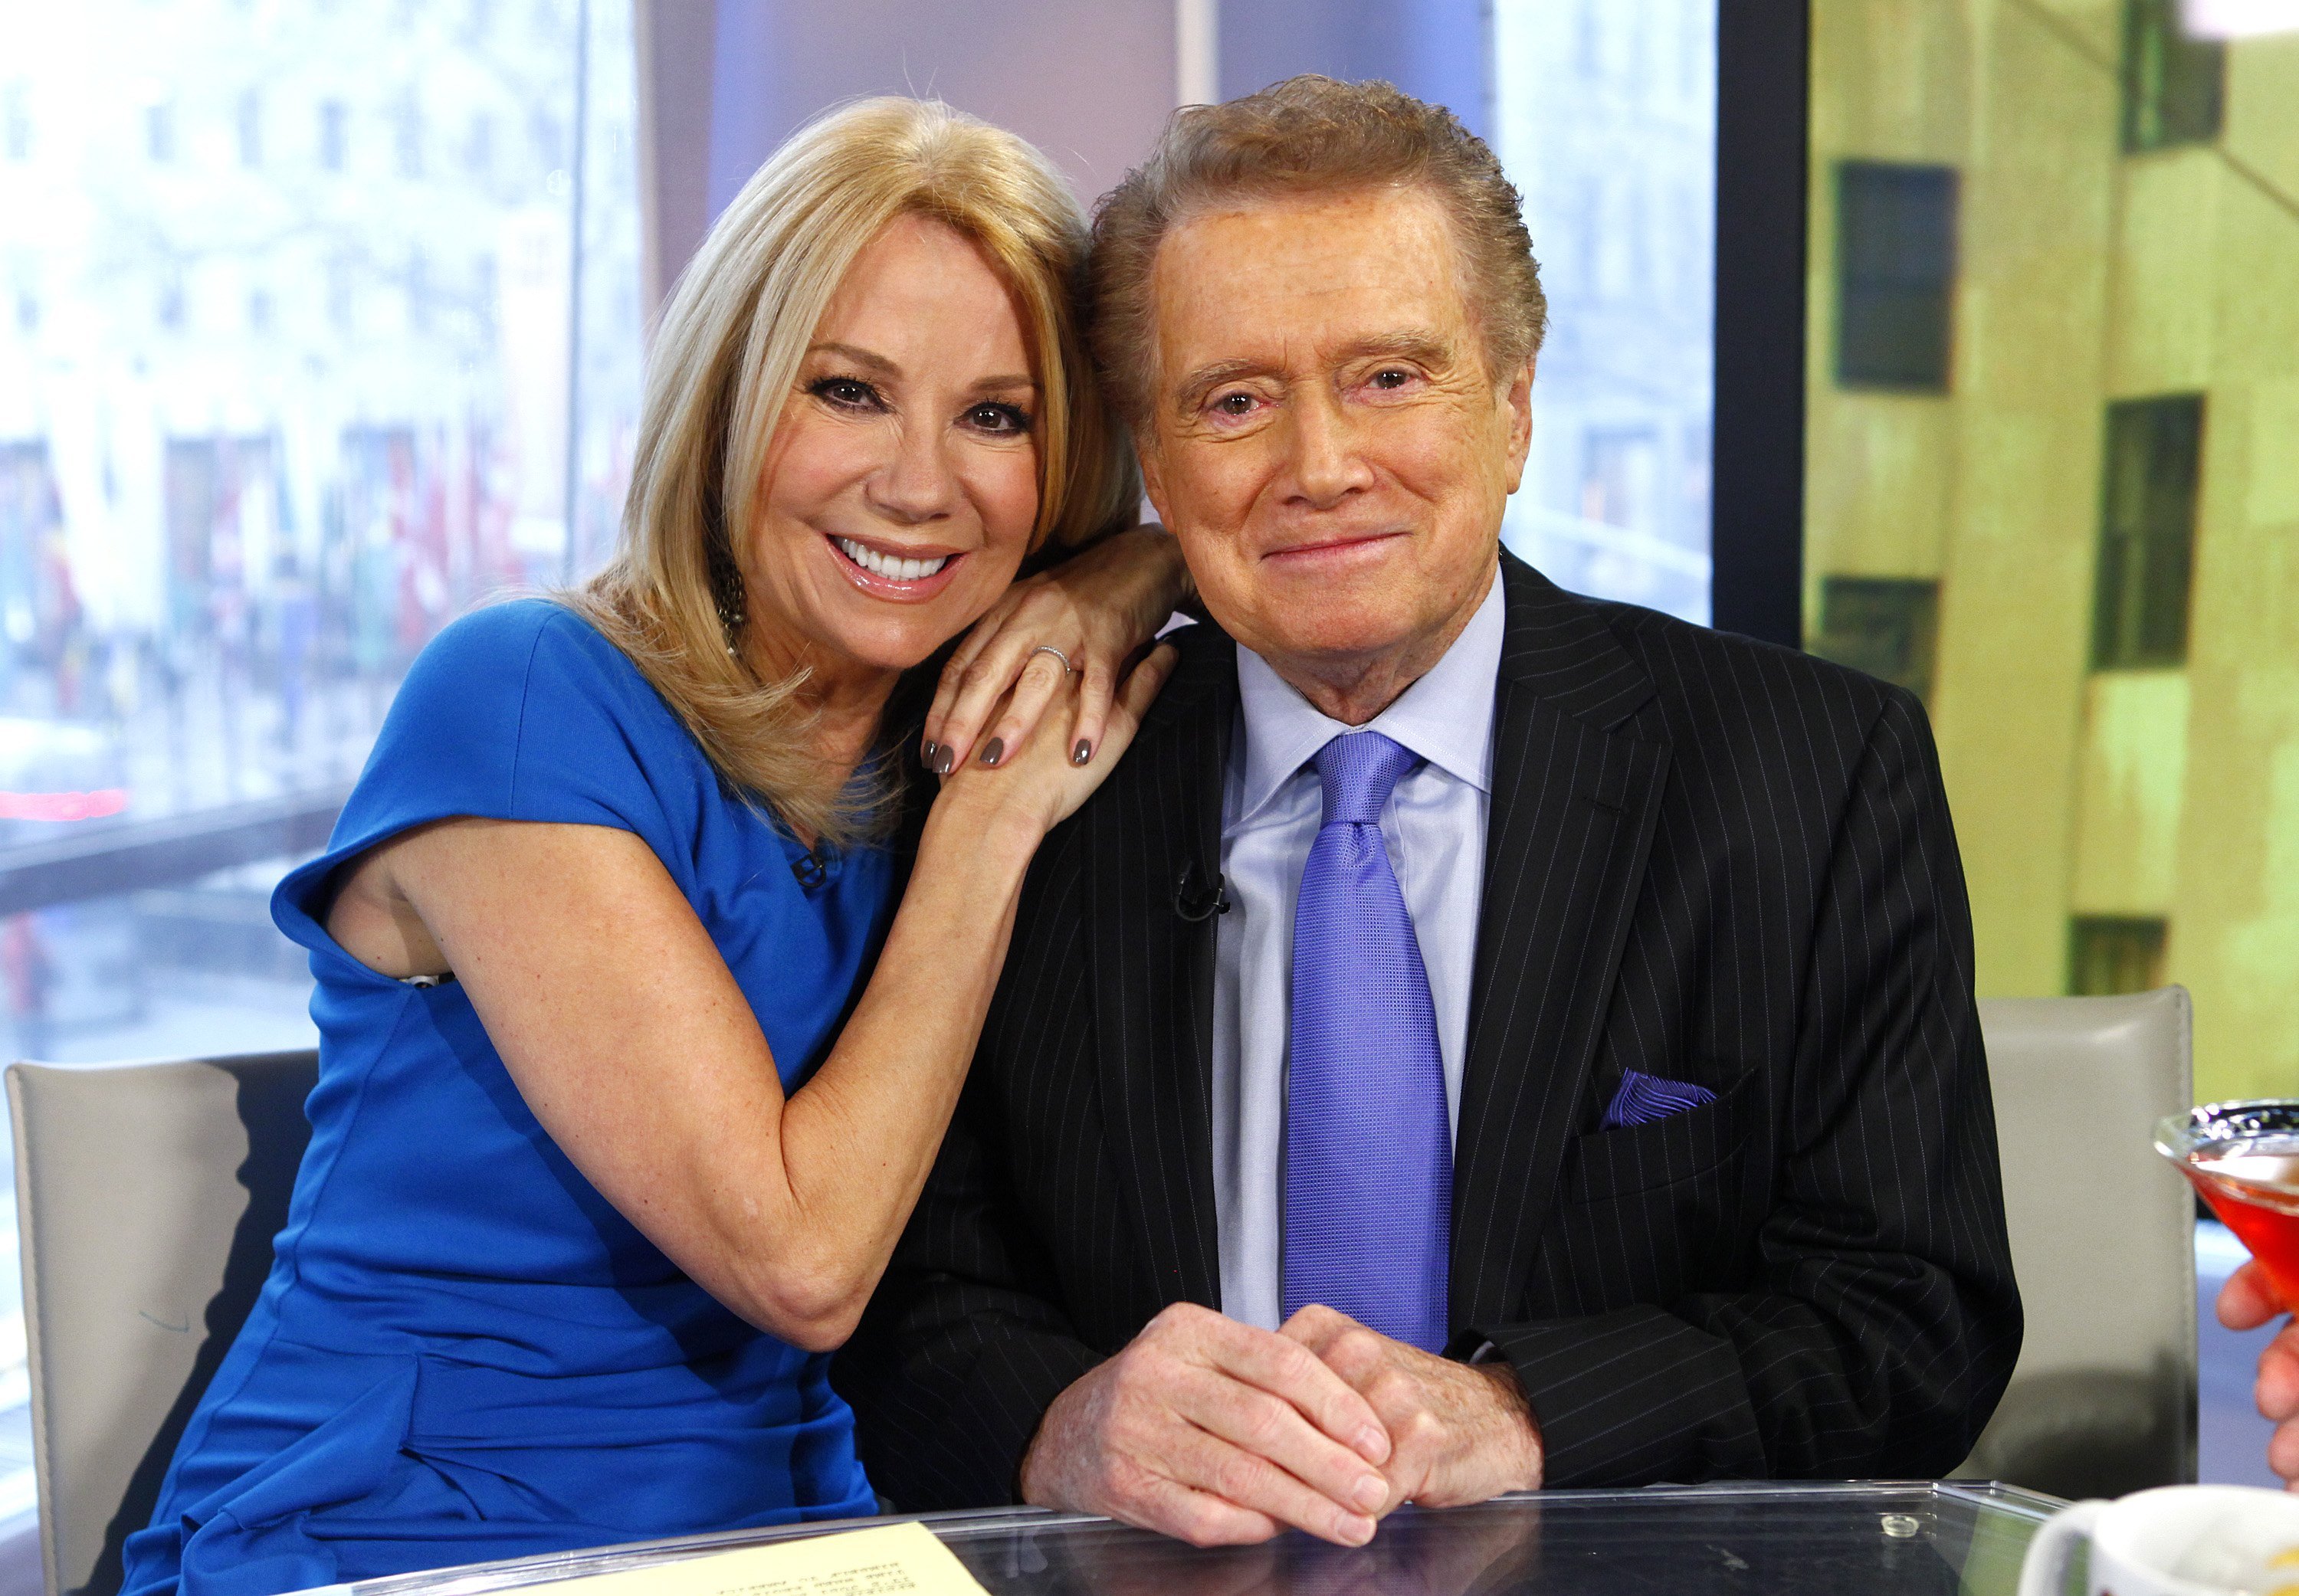 Kathie Lee Gifford and Regis Philbin appear together on "The Today Show" on January 19, 2012 | Photo: Getty Images